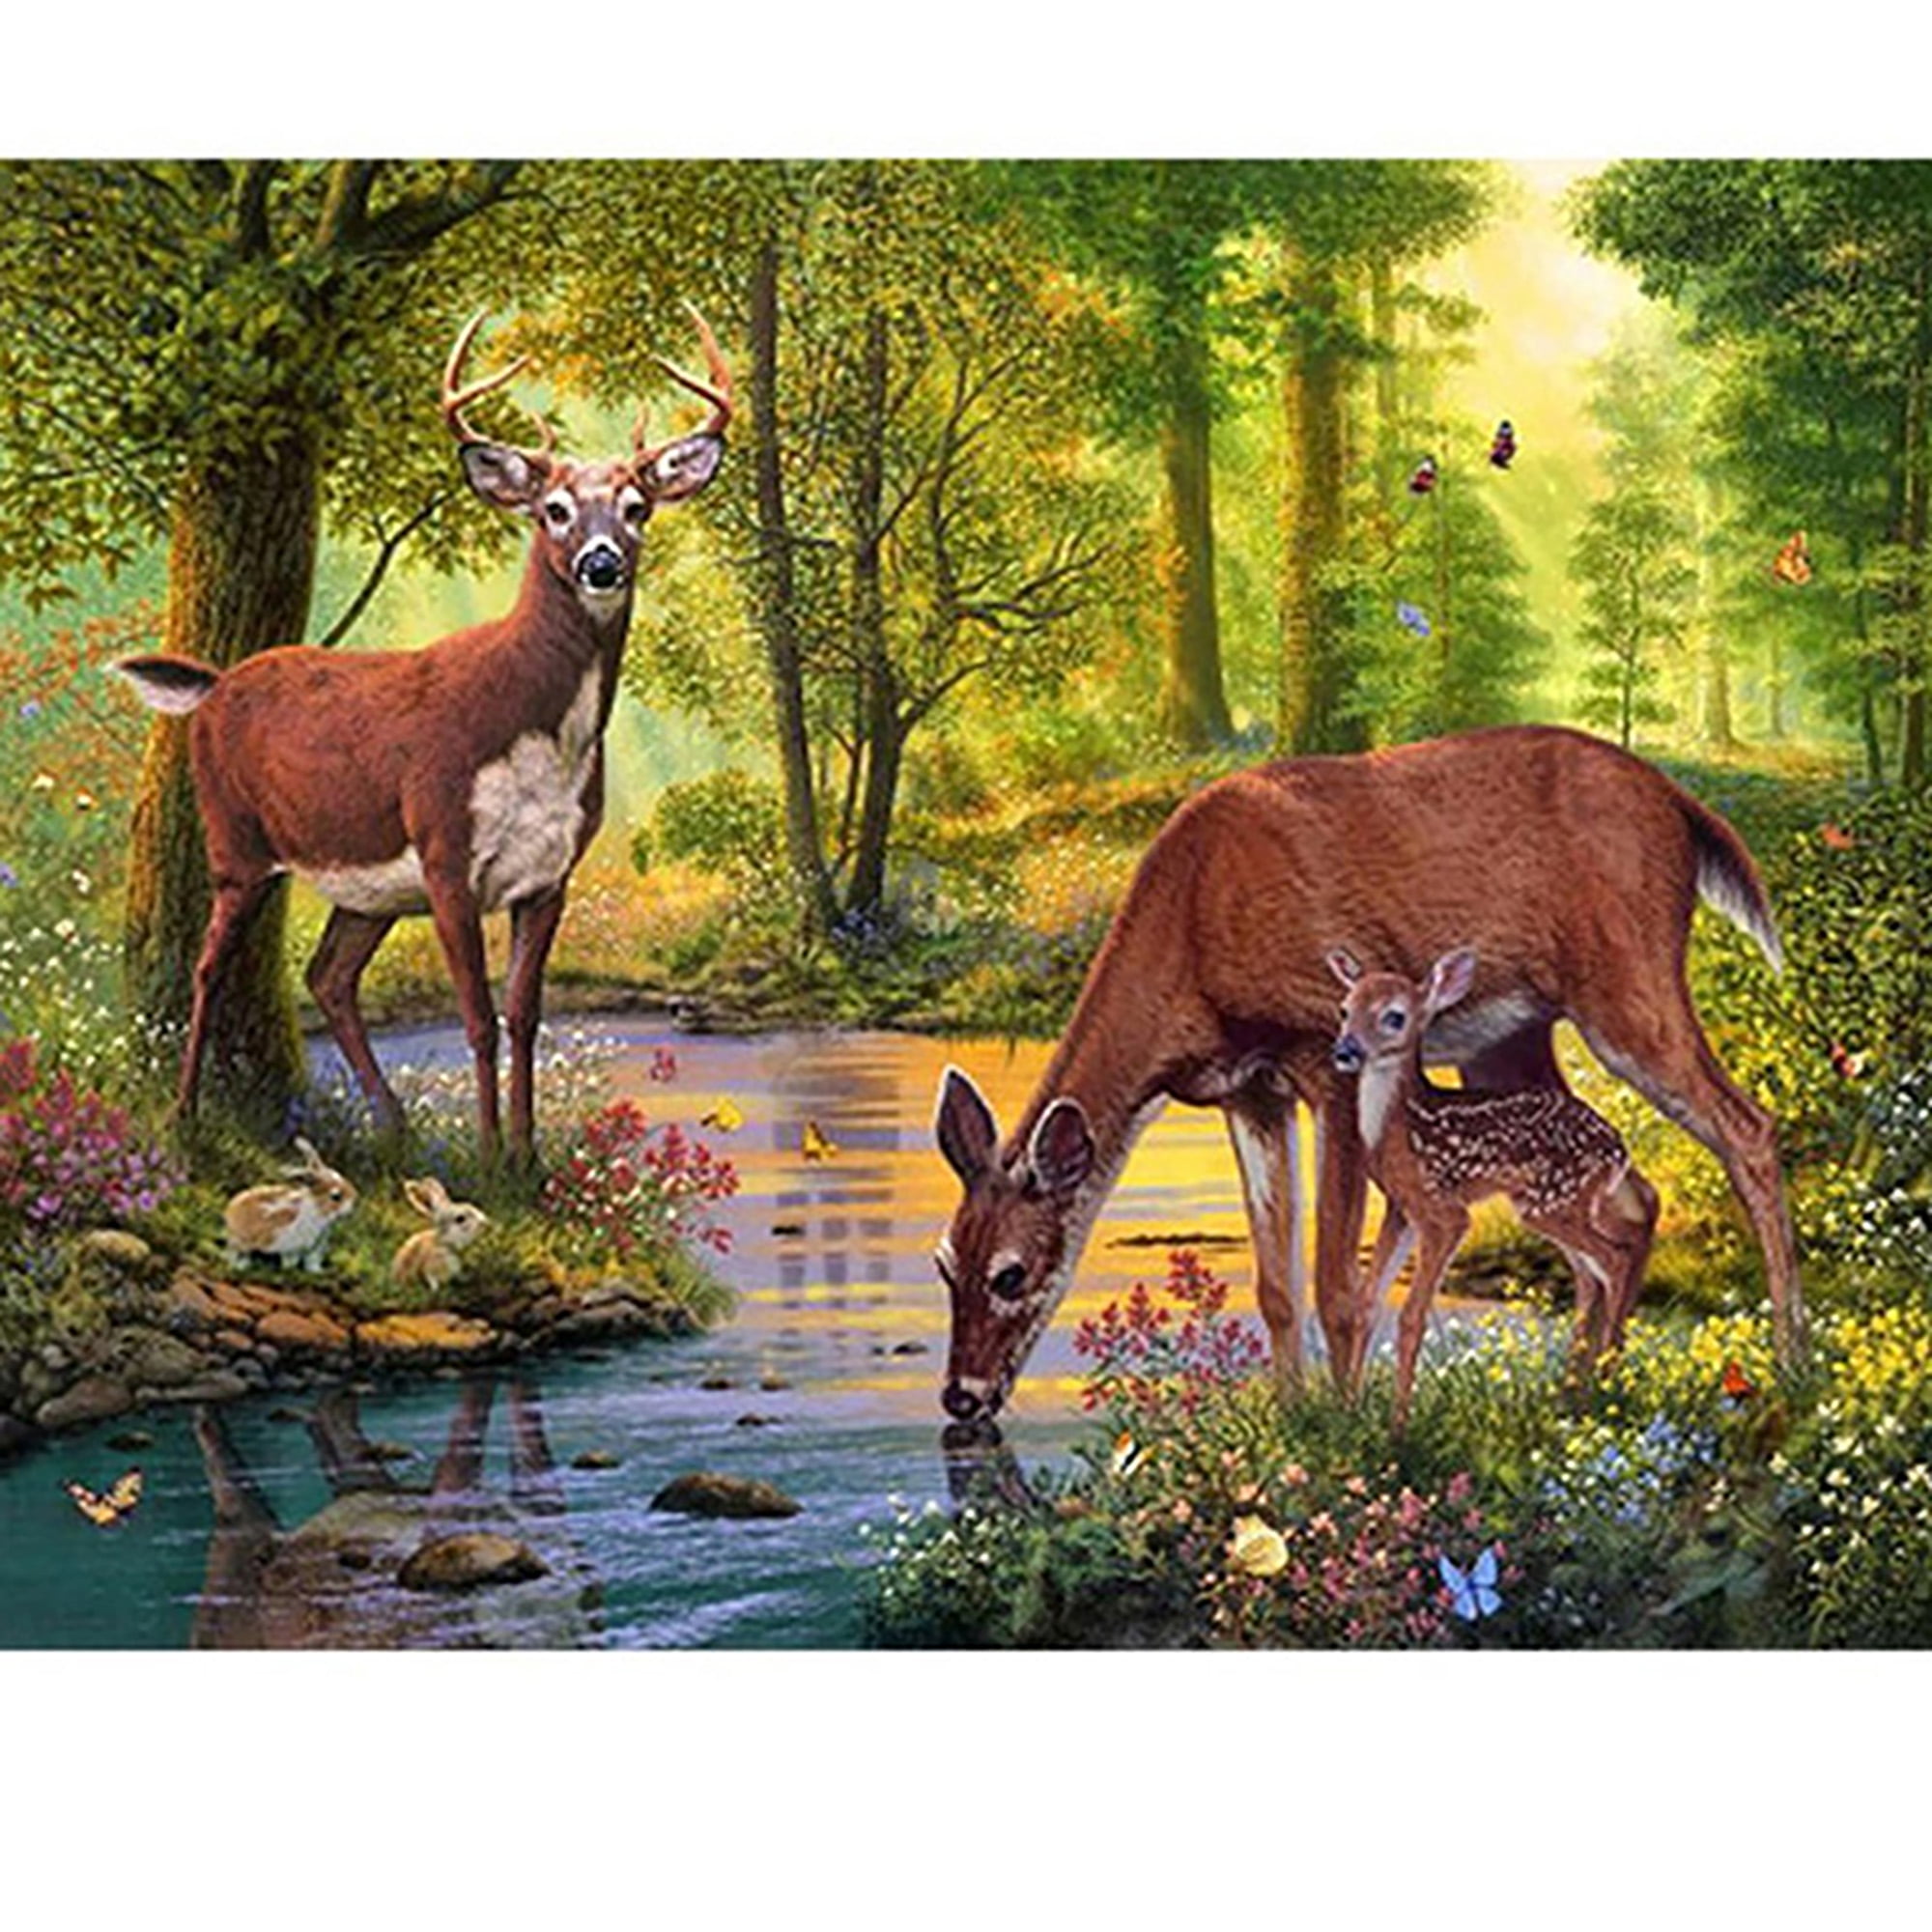 Diamond Painting Animal Deer And Cat In A Farm Design Embroidery Wall Decoration 